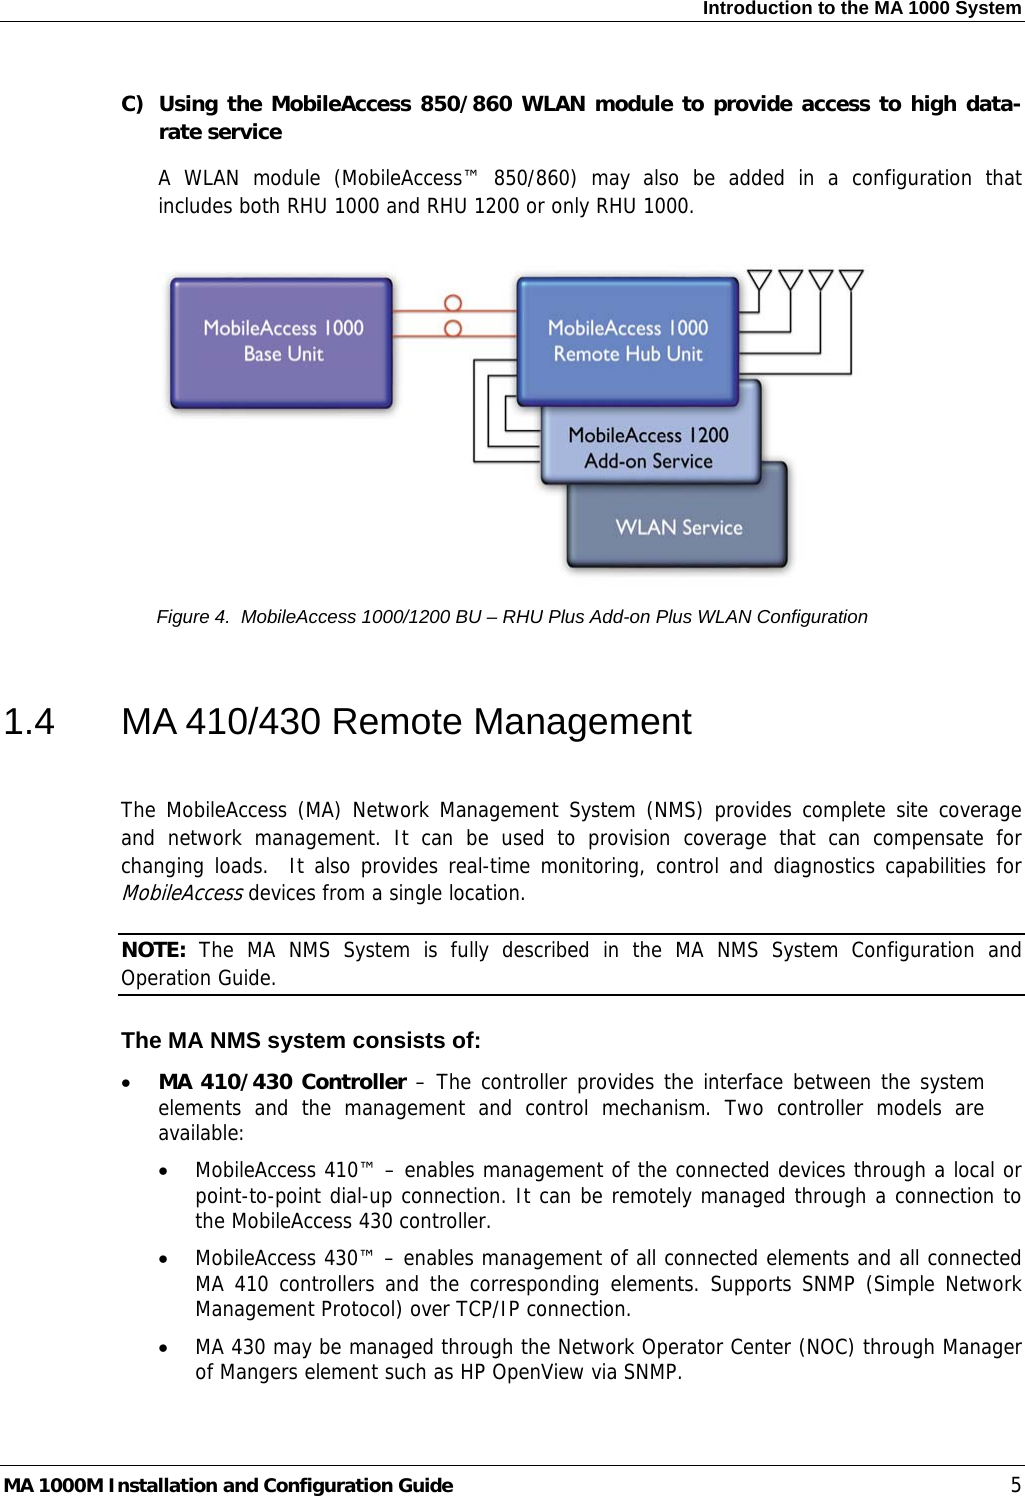 Introduction to the MA 1000 System  C) Using the MobileAccess 850/860 WLAN module to provide access to high data-rate service A WLAN module (MobileAccess™ 850/860) may also be added in a configuration that includes both RHU 1000 and RHU 1200 or only RHU 1000.    Figure 4.  MobileAccess 1000/1200 BU – RHU Plus Add-on Plus WLAN Configuration  1.4  MA 410/430 Remote Management  The MobileAccess (MA) Network Management System (NMS) provides complete site coverage and network management. It can be used to provision coverage that can compensate for changing loads.  It also provides real-time monitoring, control and diagnostics capabilities for MobileAccess devices from a single location.  NOTE:  The MA NMS System is fully described in the MA NMS System Configuration and Operation Guide. The MA NMS system consists of: • MA 410/430 Controller – The controller provides the interface between the system elements and the management and control mechanism. Two controller models are available: • MobileAccess 410™ – enables management of the connected devices through a local or point-to-point dial-up connection. It can be remotely managed through a connection to the MobileAccess 430 controller. • MobileAccess 430™ – enables management of all connected elements and all connected MA 410 controllers and the corresponding elements. Supports SNMP (Simple Network Management Protocol) over TCP/IP connection.  • MA 430 may be managed through the Network Operator Center (NOC) through Manager of Mangers element such as HP OpenView via SNMP. MA 1000M Installation and Configuration Guide    5 